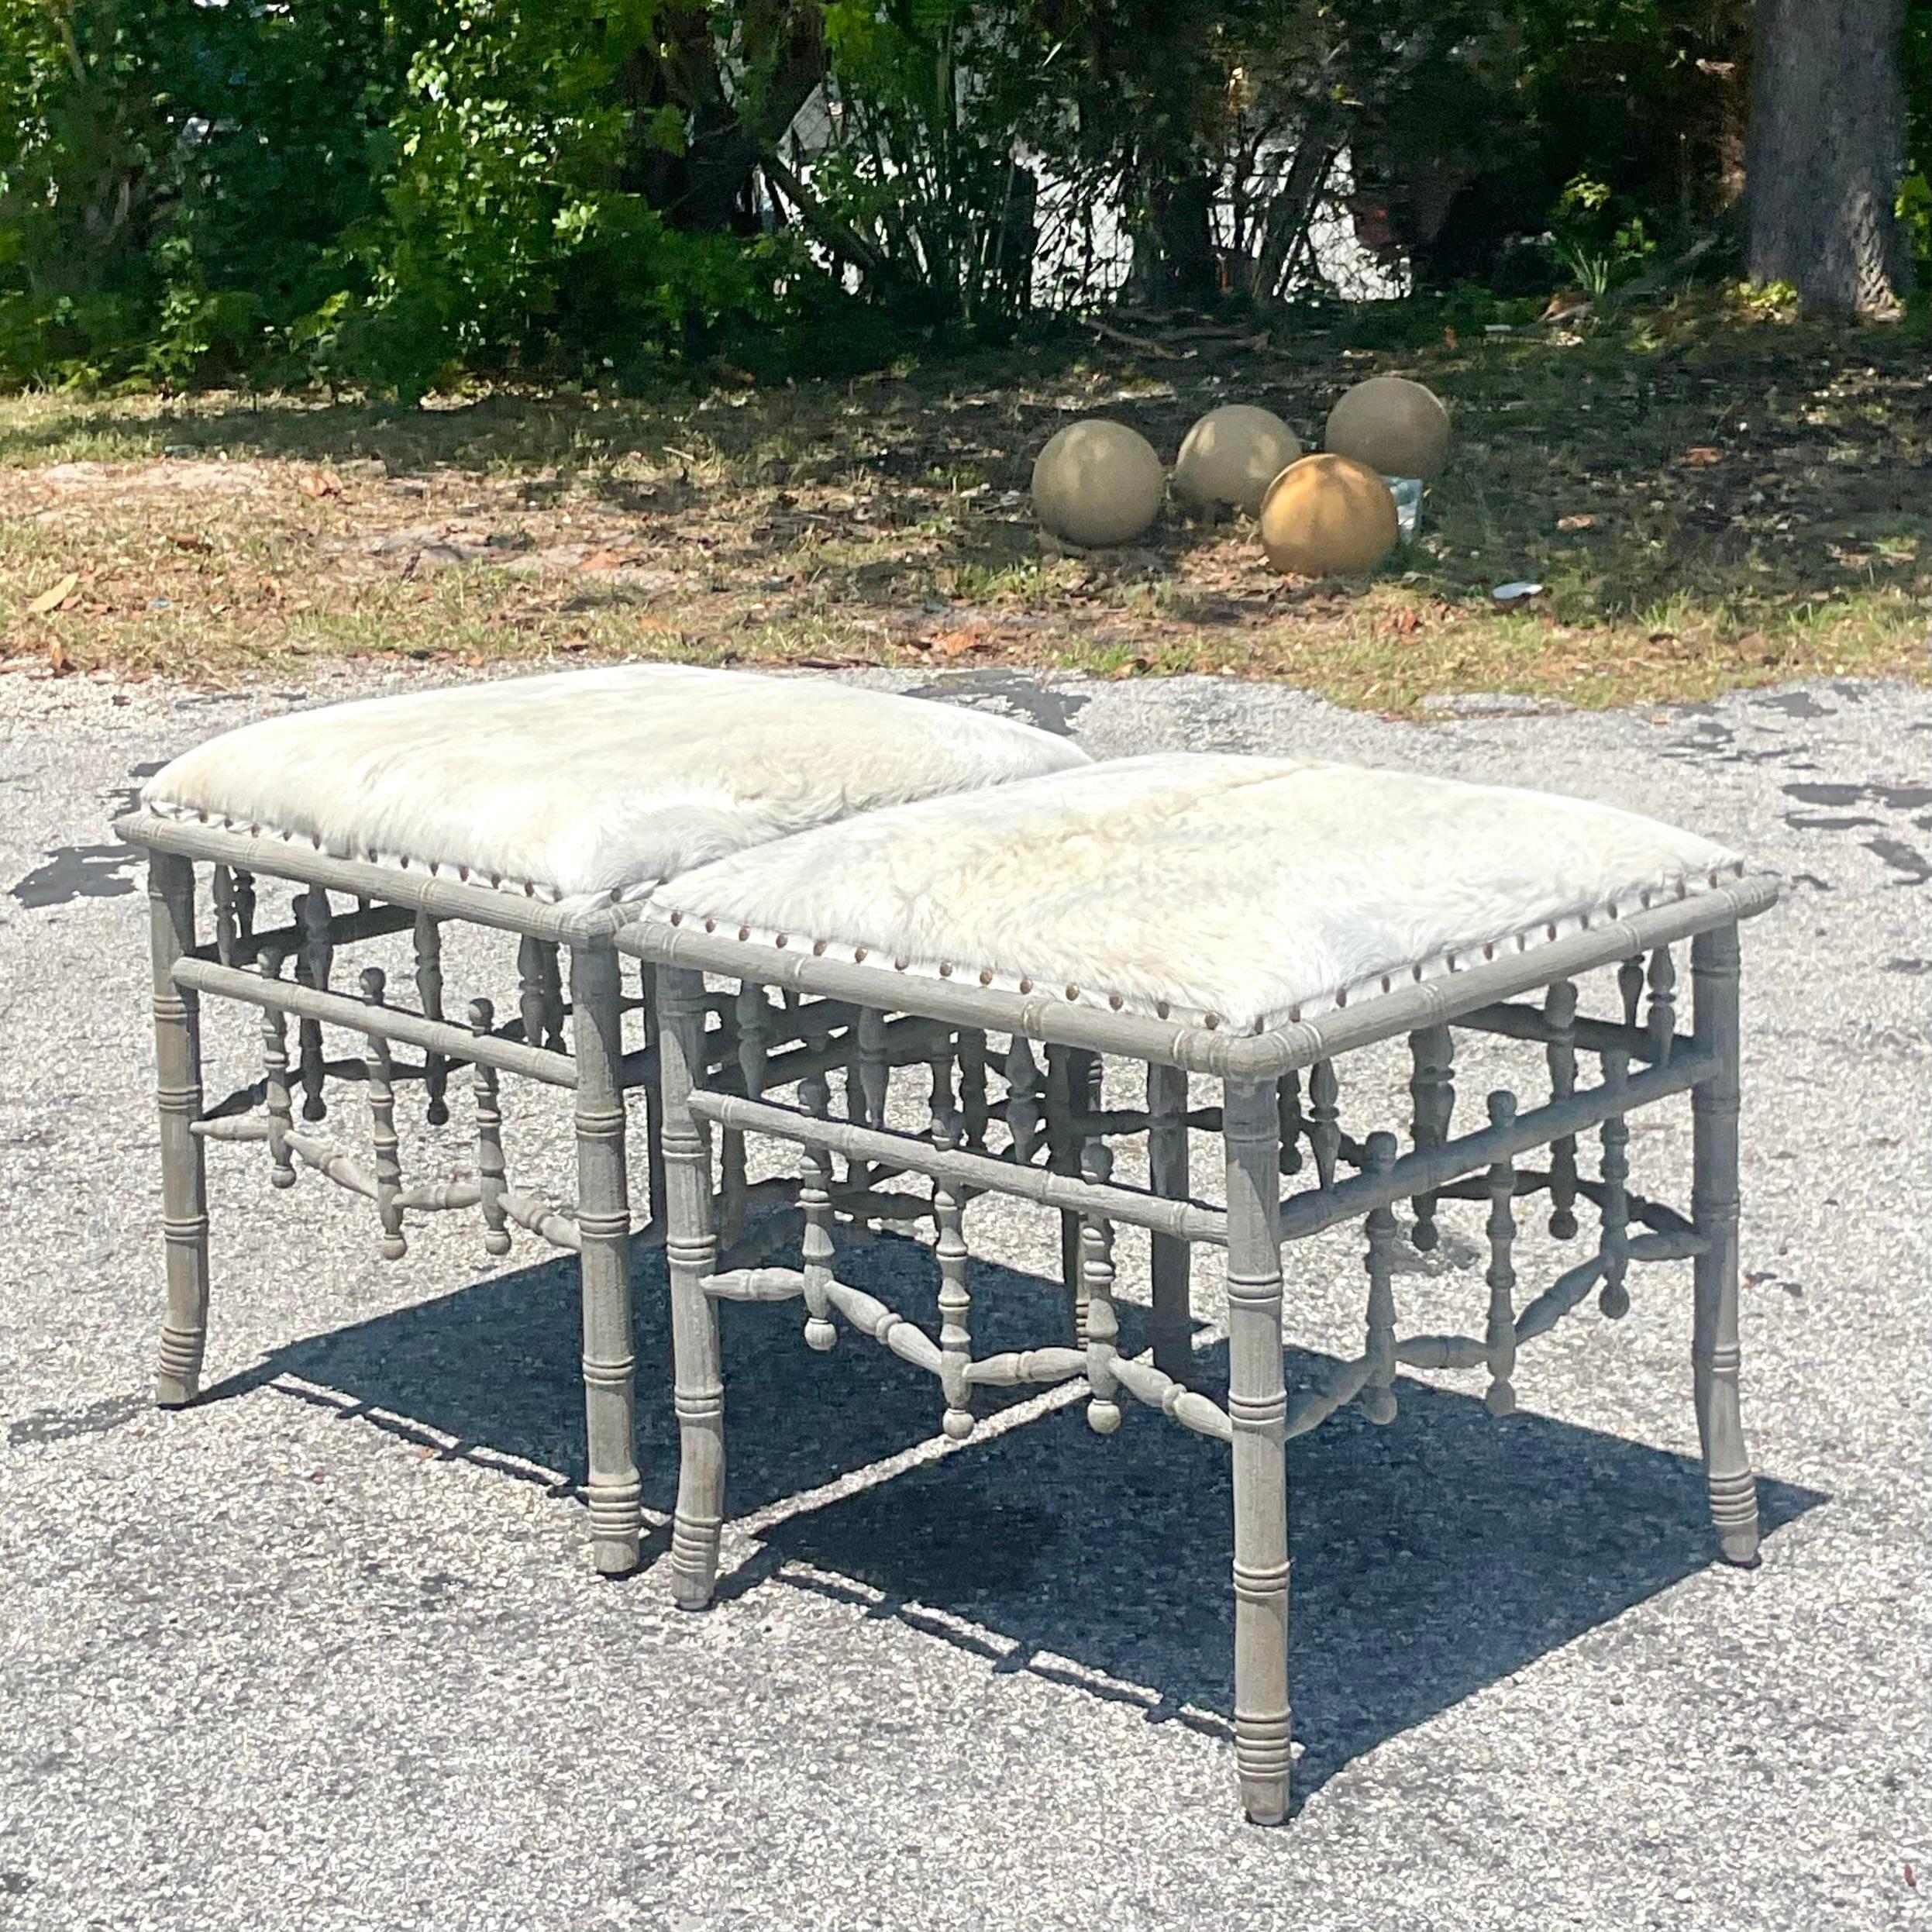 Vintage Boho Guildmasters Fretwork Low Stools - a Pair In Good Condition For Sale In west palm beach, FL